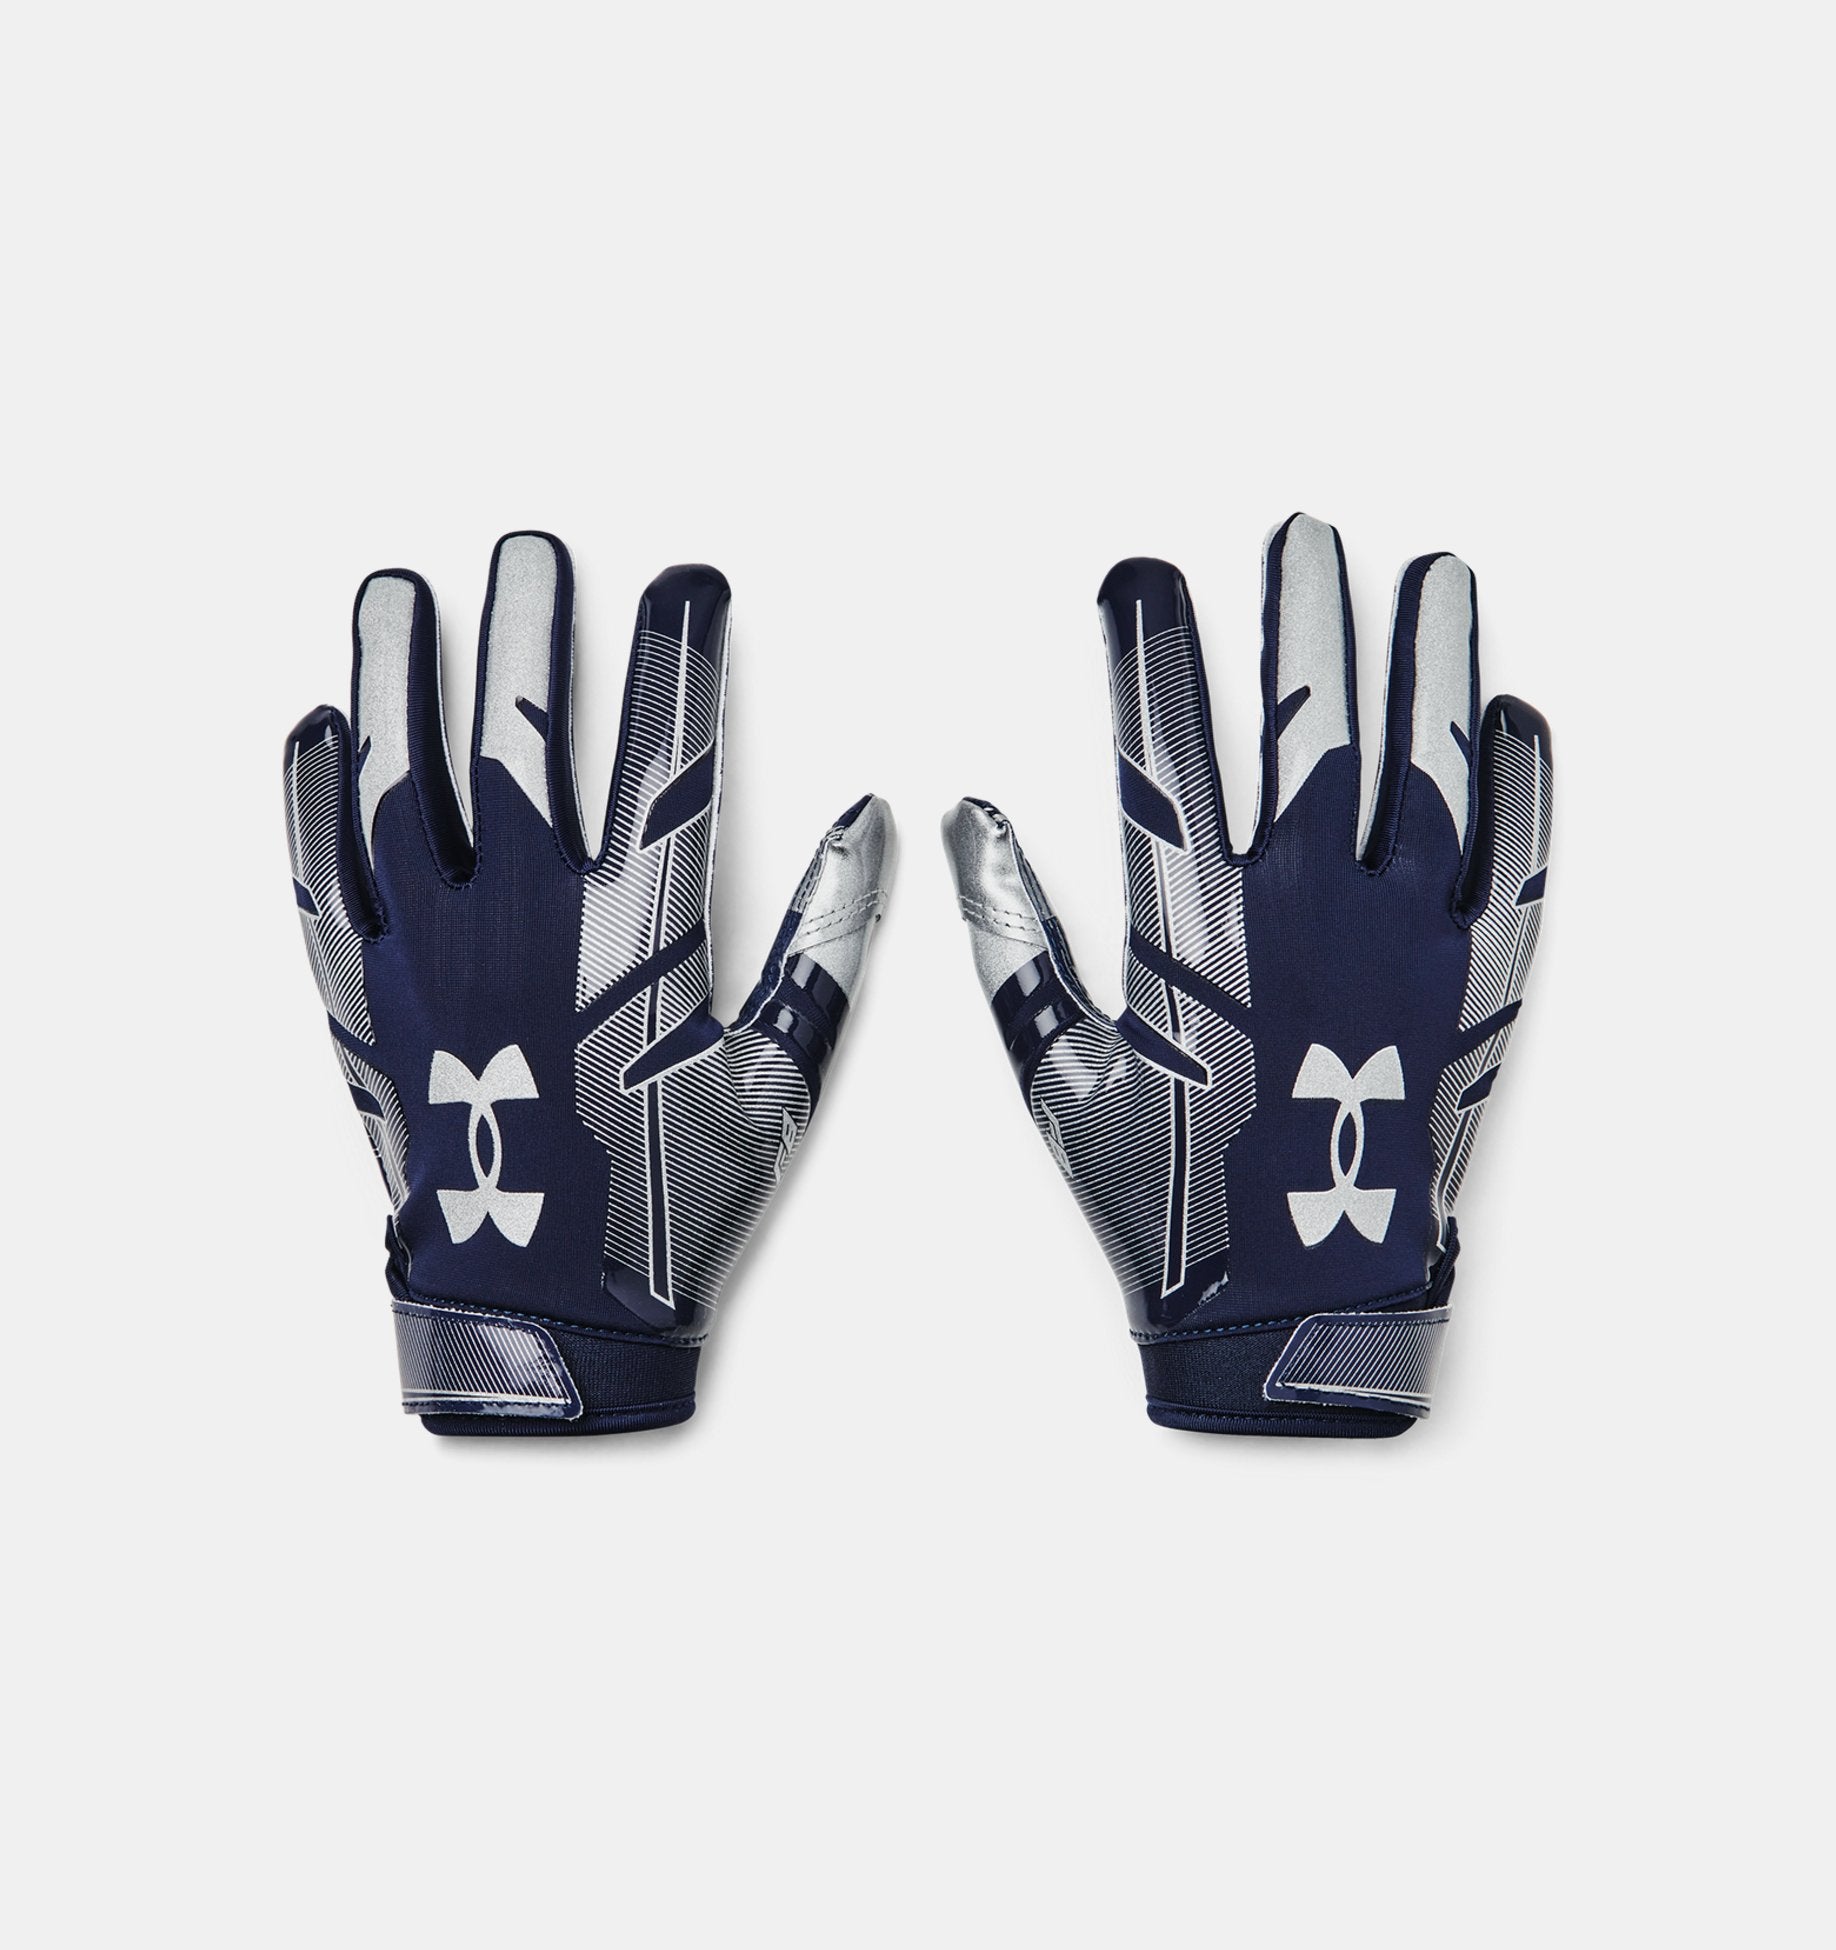 Under Armour Youth F8 Football Gloves Accessories Under Armour Midnight Navy-410 Youth Small 